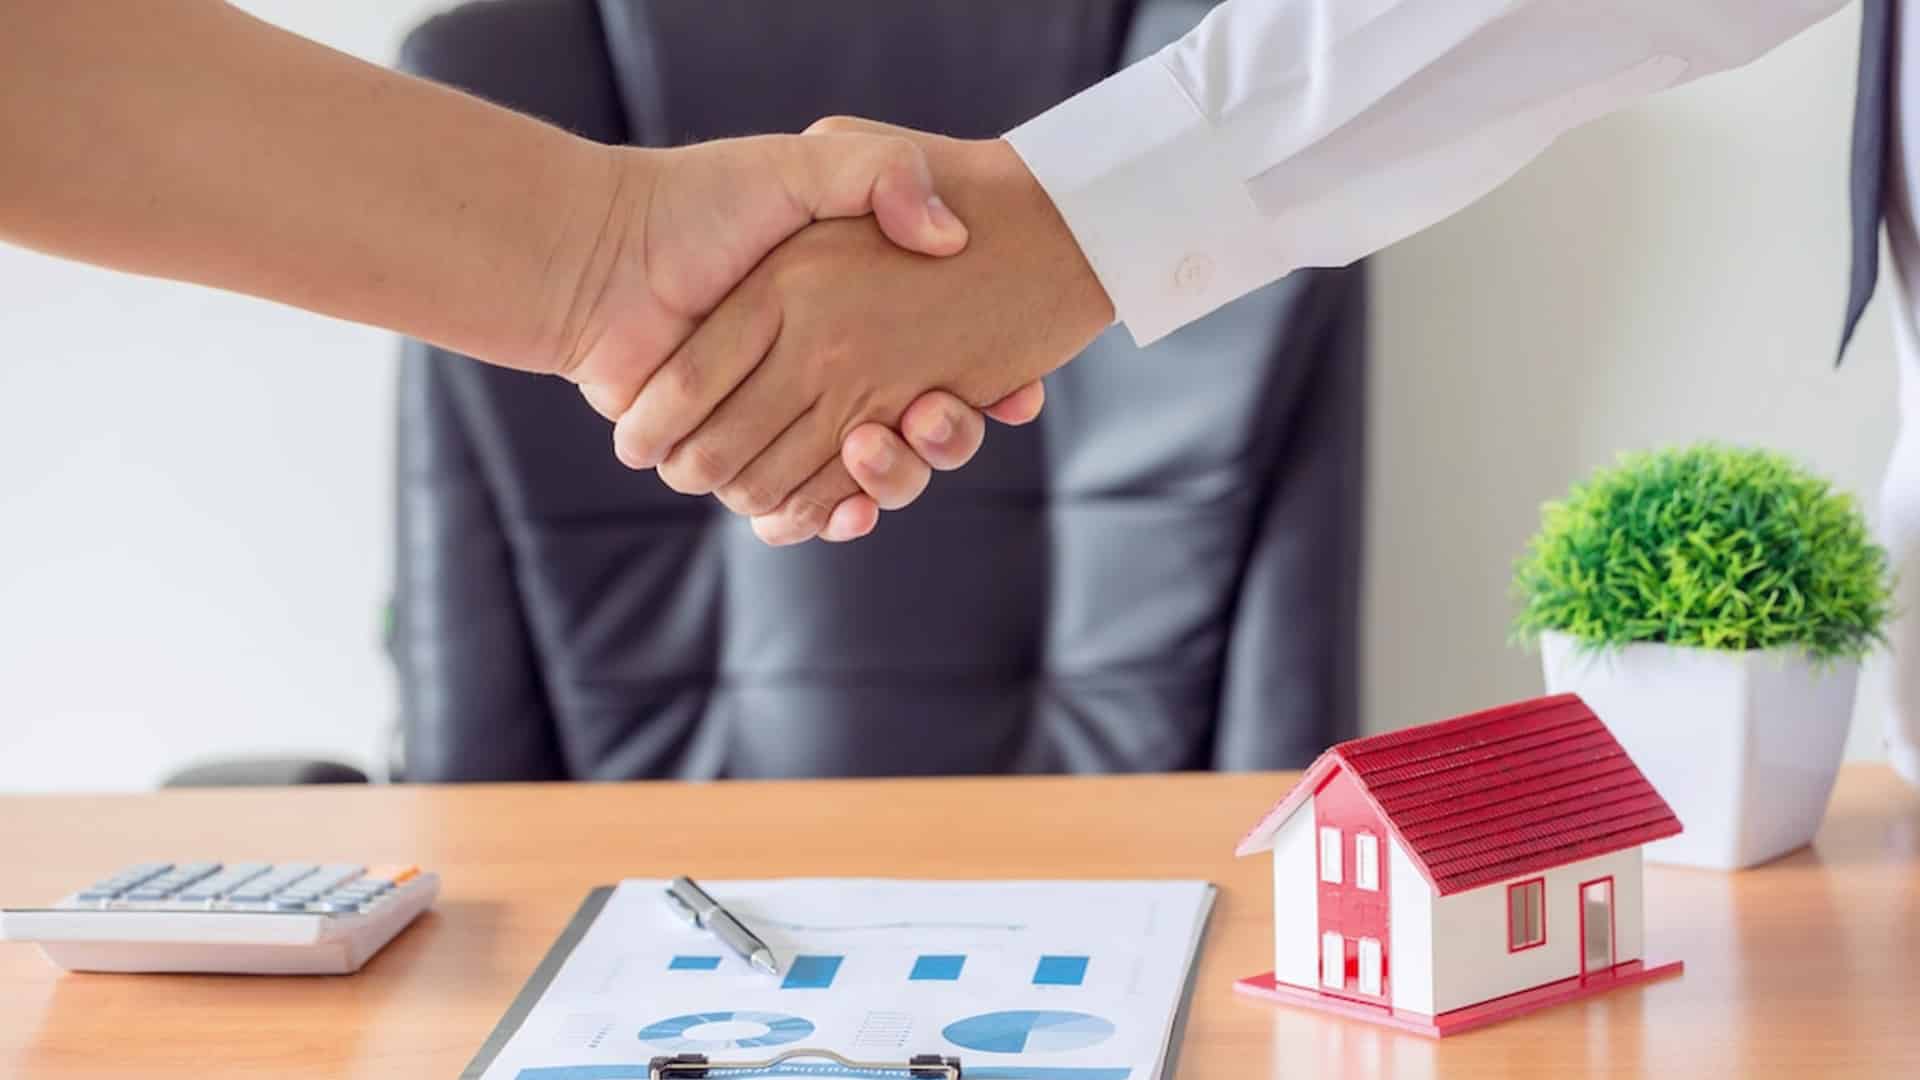 CREDAI, Venture Catalysts set up USD 100 mn proptech fund to support startups in real estate